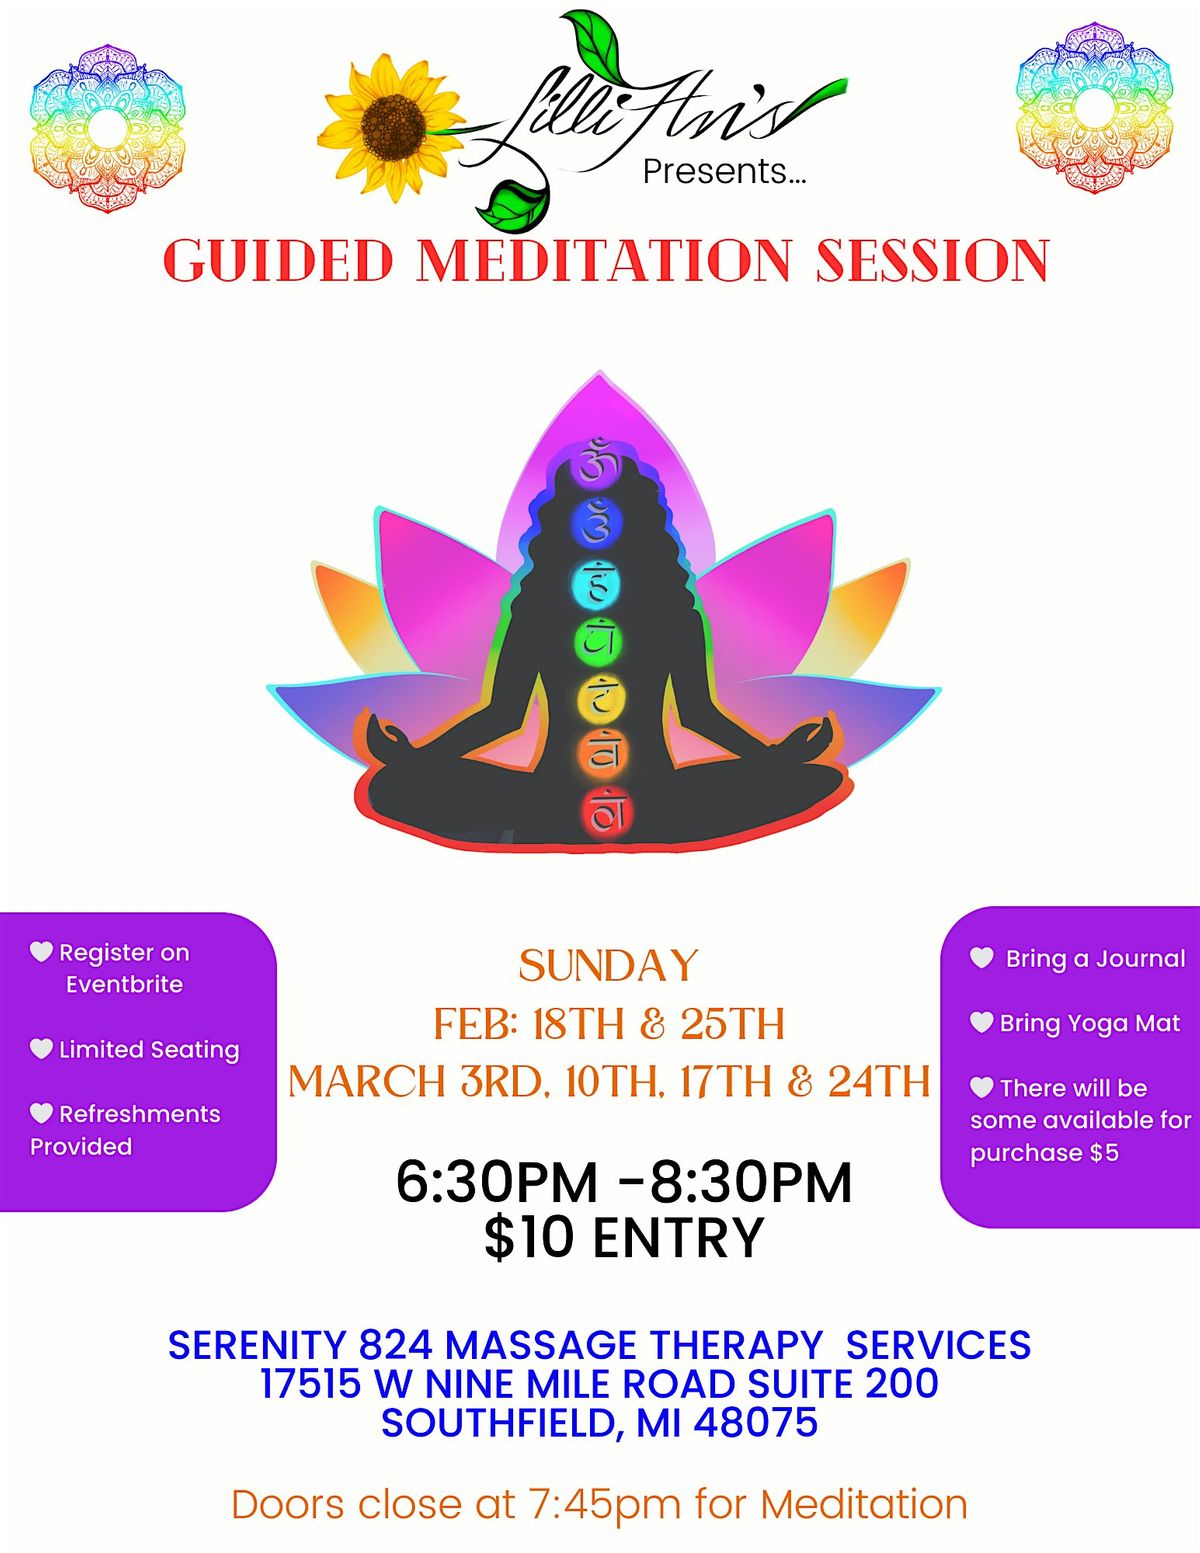 Guided Meditation Session